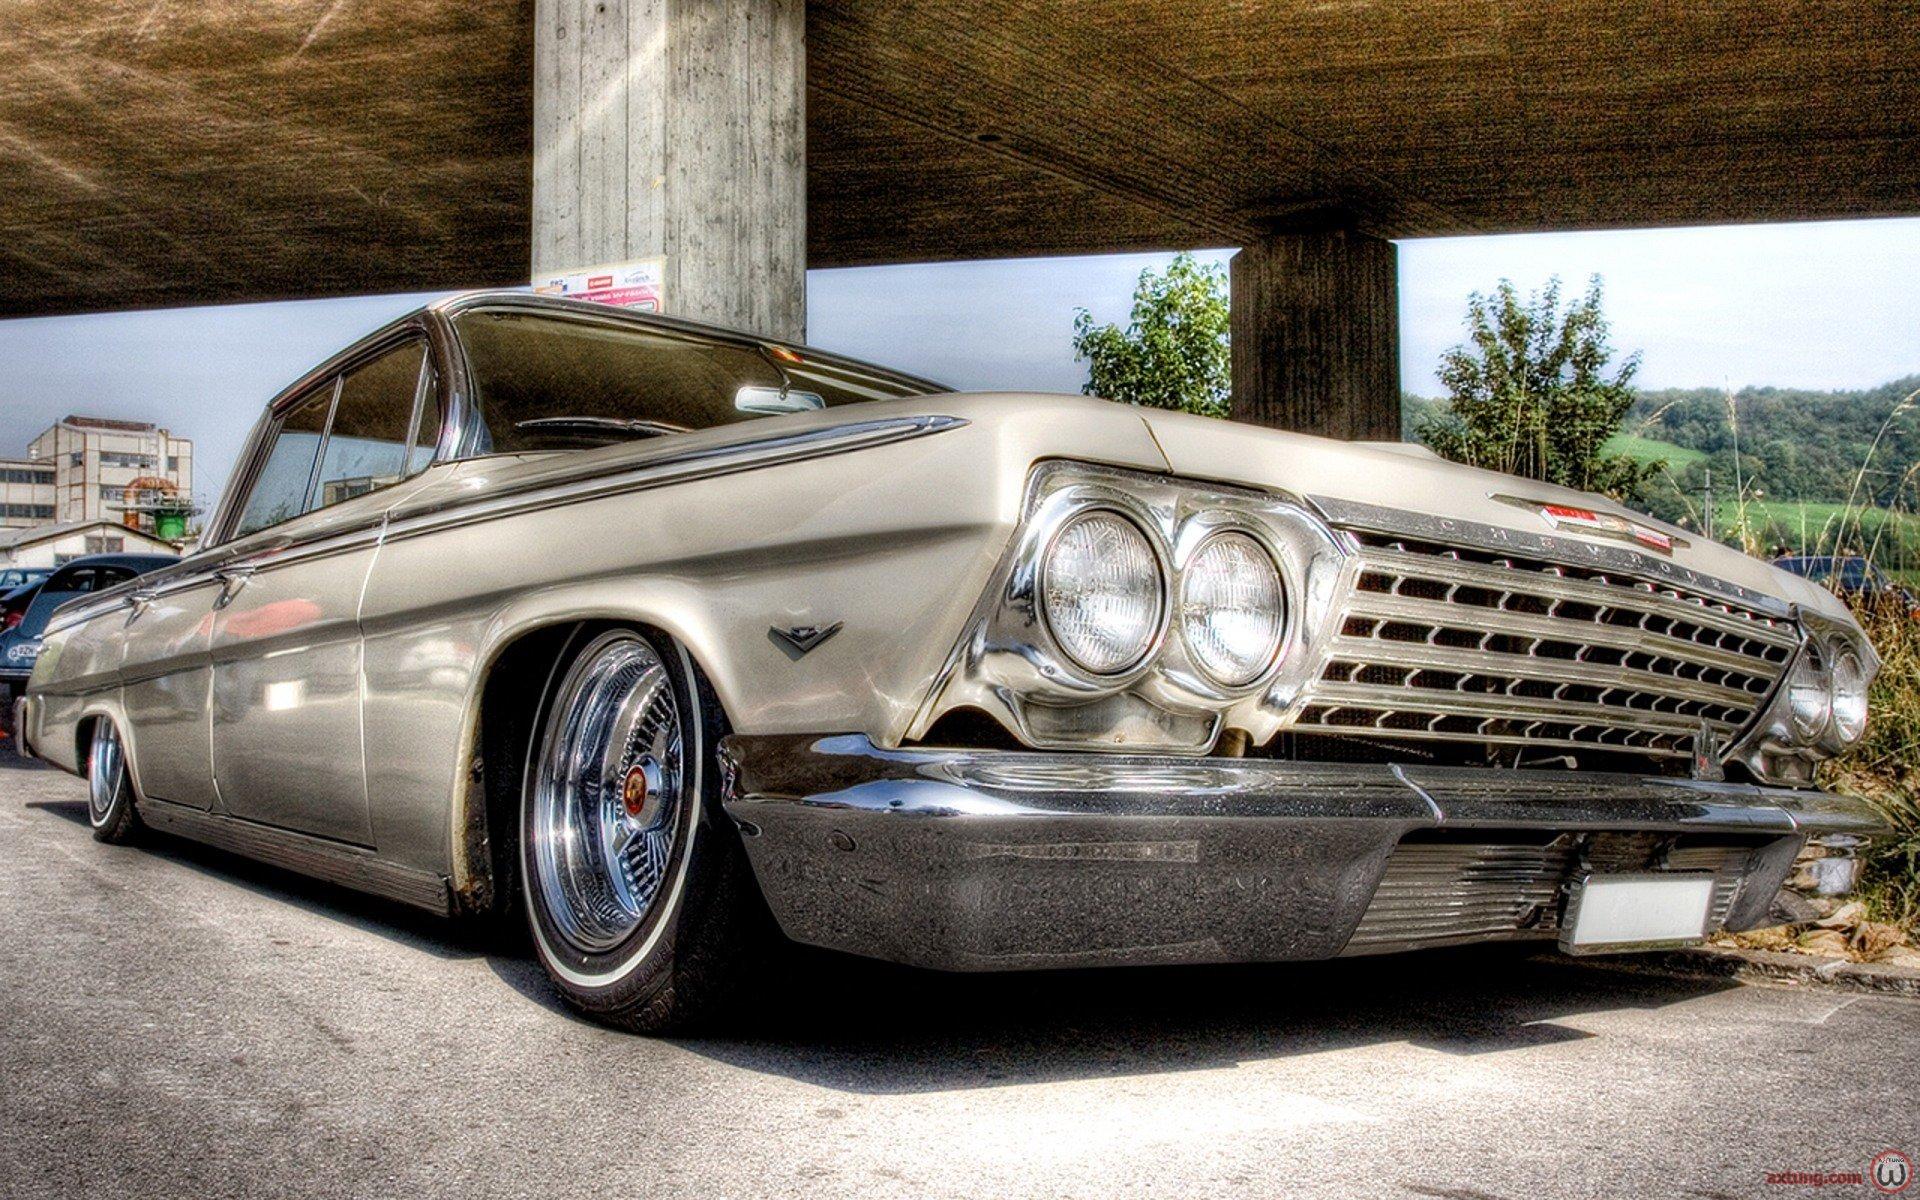 Lowrider Car Wallpaper Images amp Pictures   Becuo